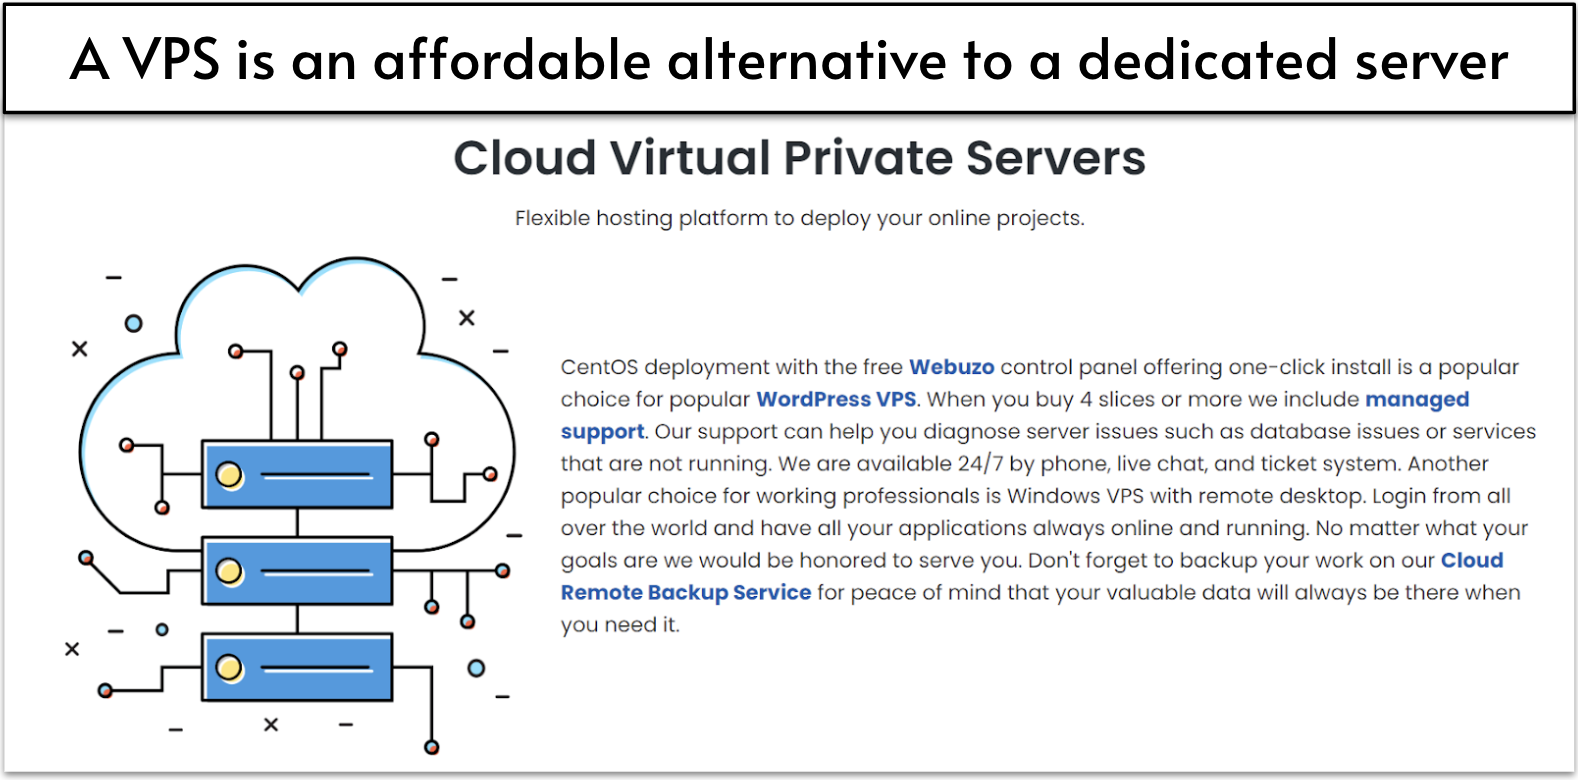 InterServer cloud VPS features